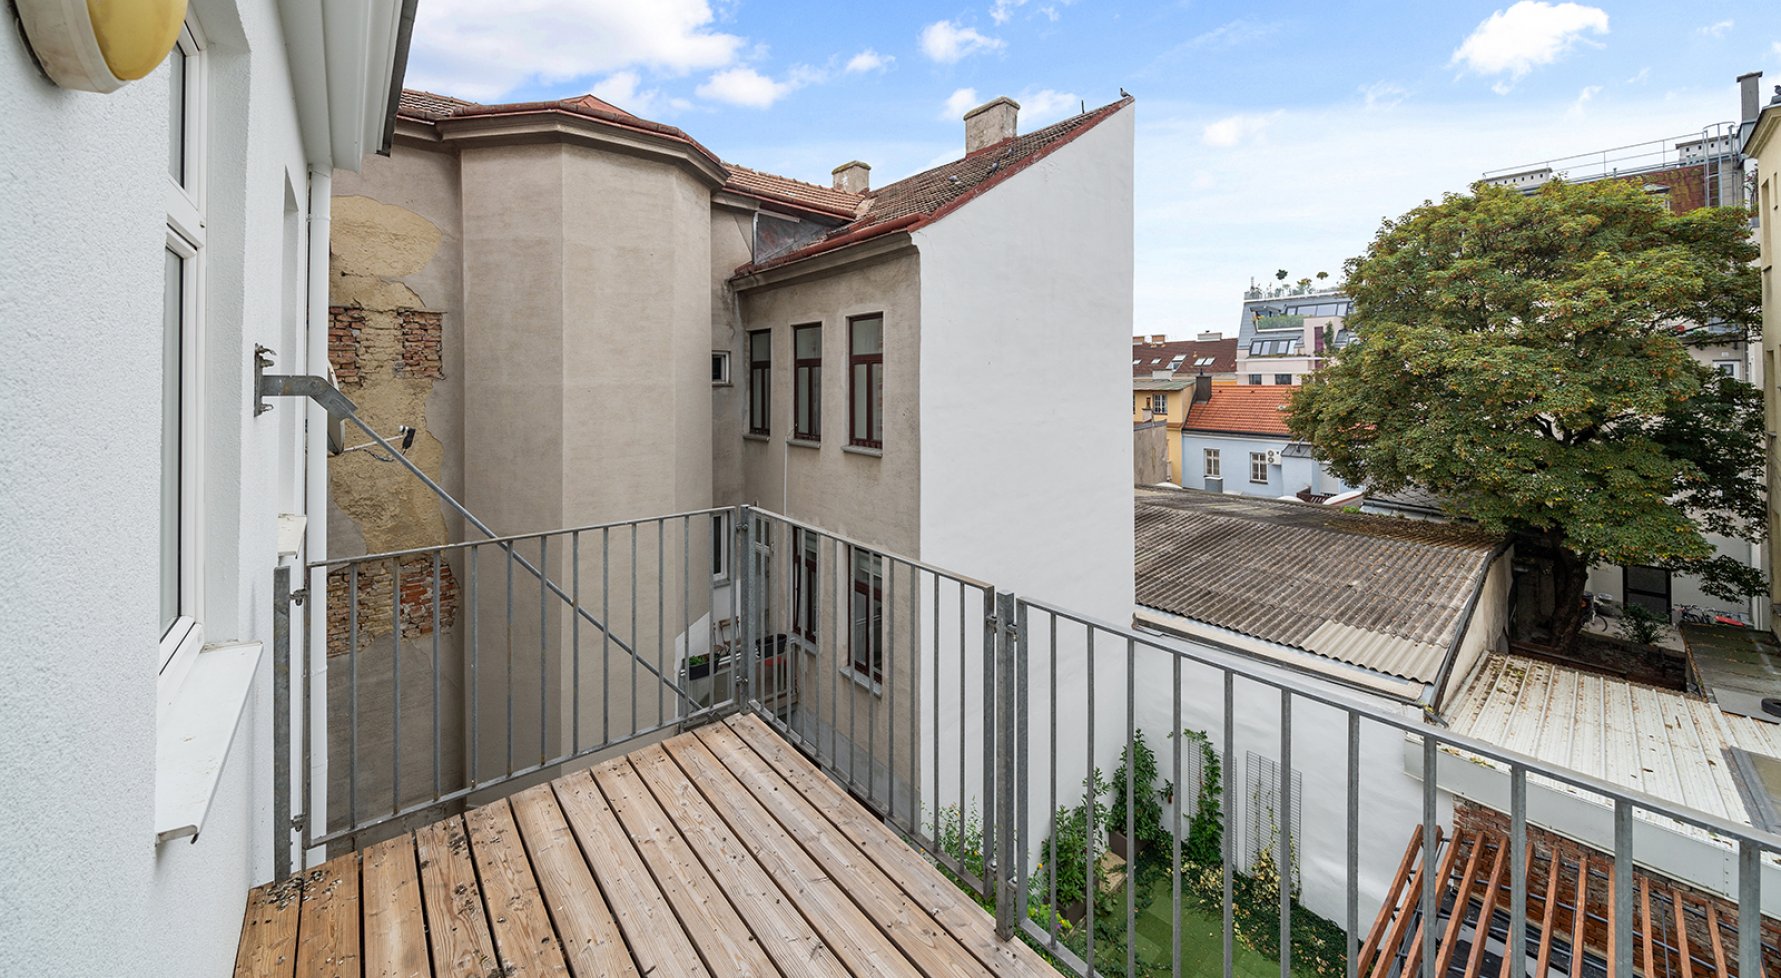 Property in 1170 Wien, 17. Bezirk: 2-room old building flat with balcony - picture 1